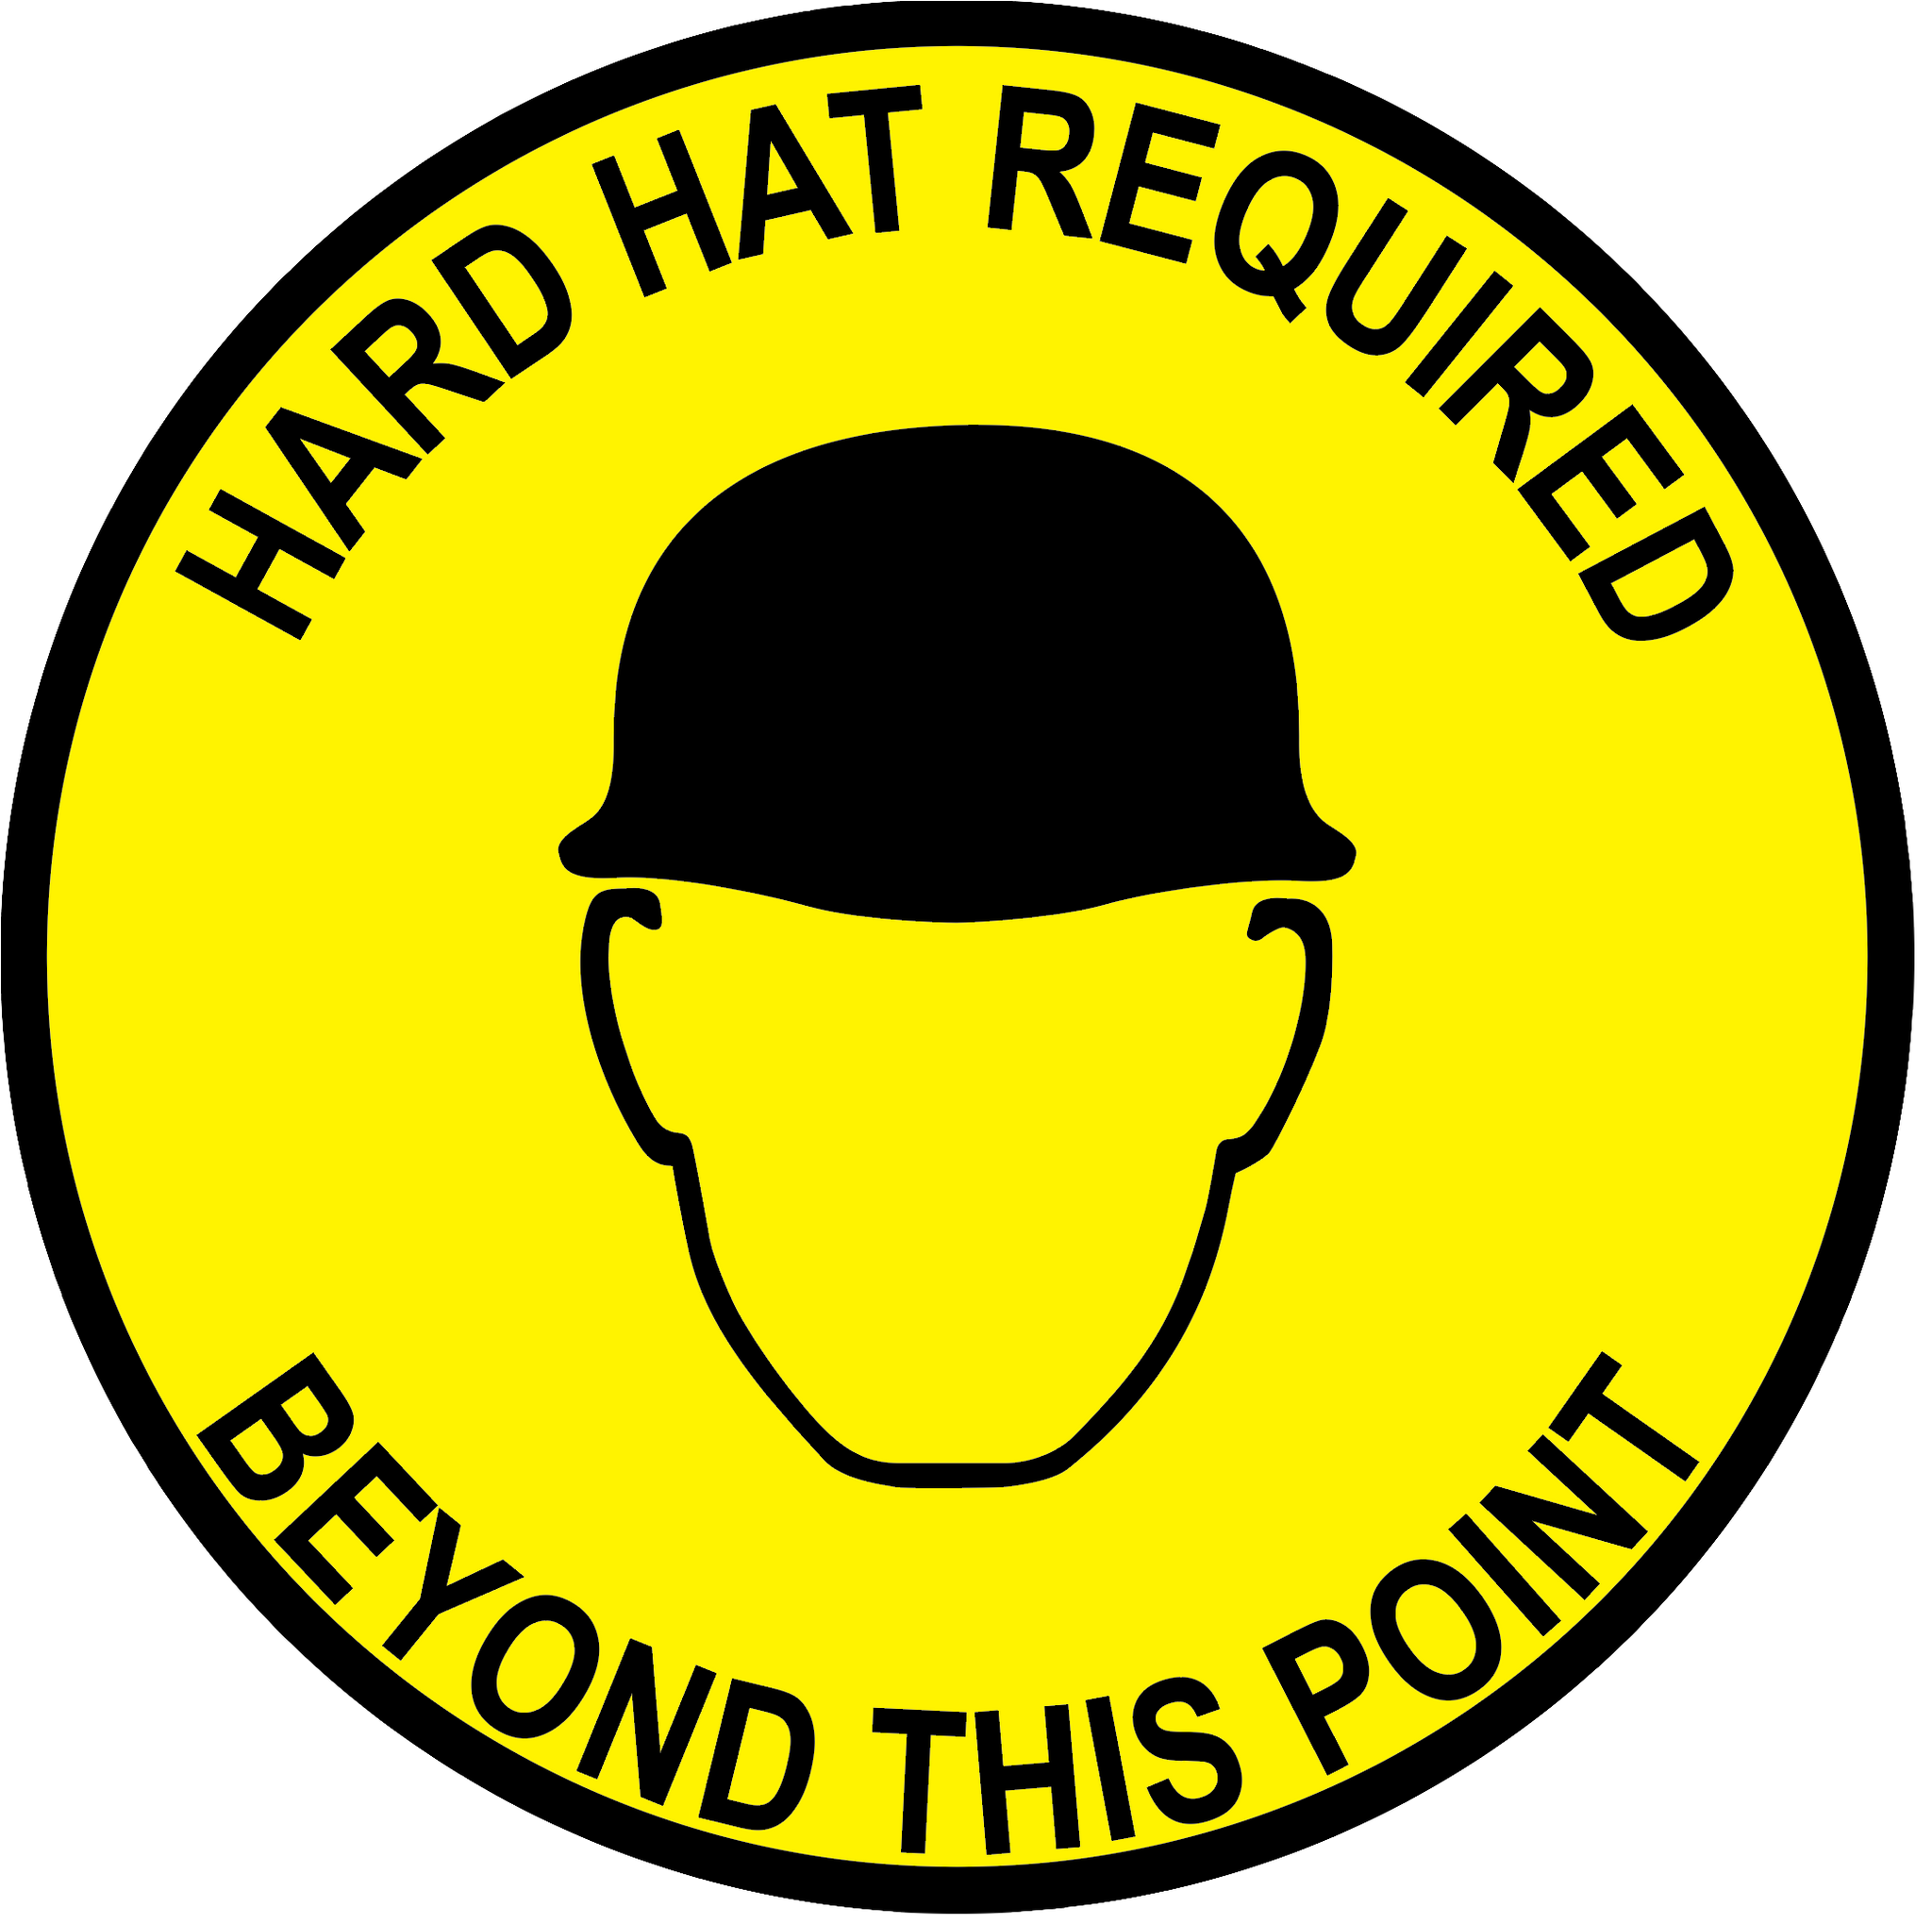 "Hard Hat Required Beyond This Point" Durable Matte Laminated Vinyl Floor Sign- Various Sizes Available